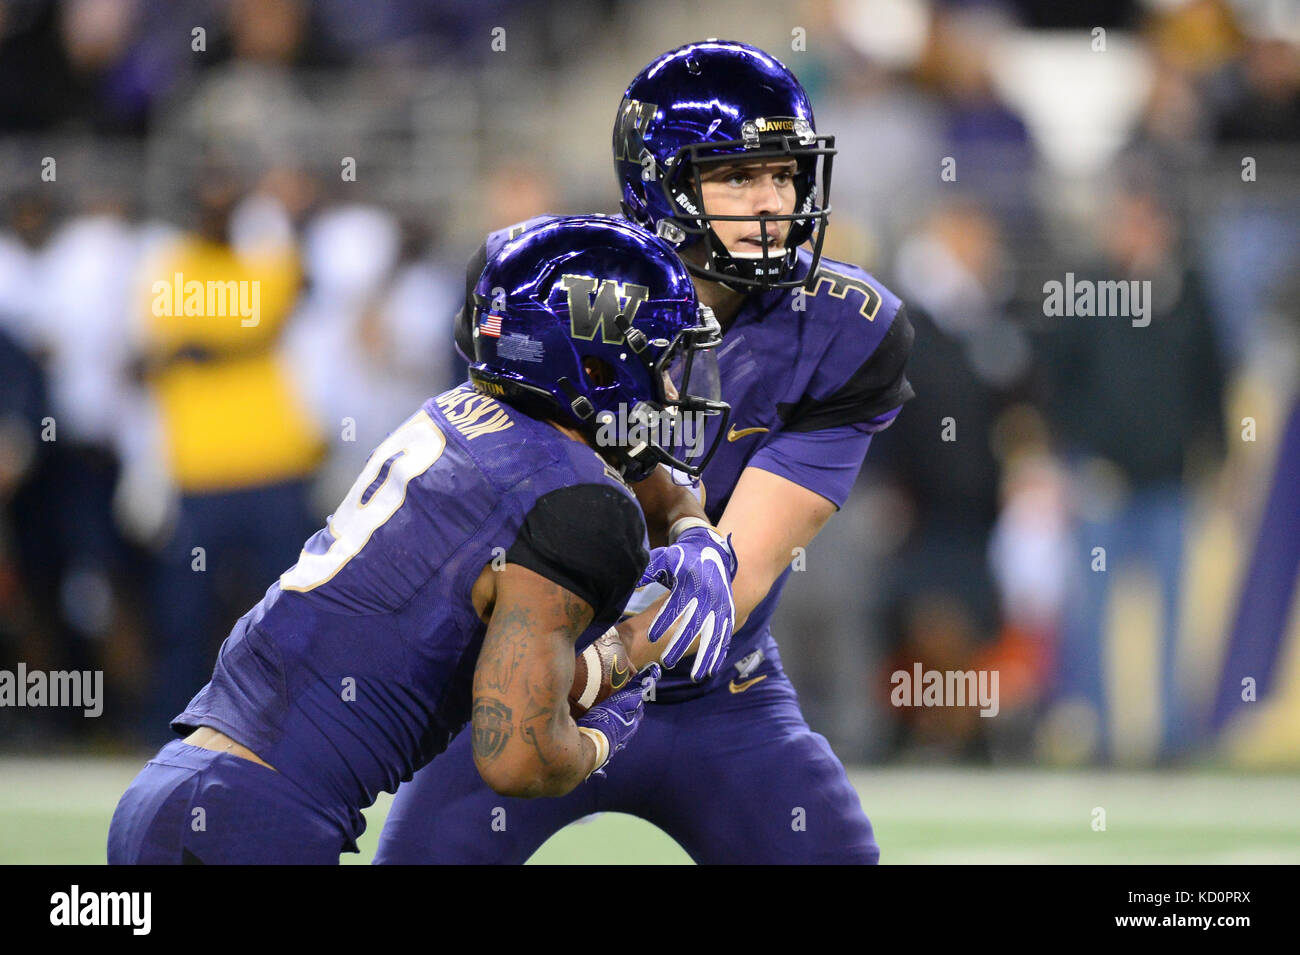 Seattle, WA, USA. 7th Oct, 2017. UW quarterback Jake Browning (3) hands off to Myles Gaskin (9) during a PAC12 football game between the Cal Bears and the Washington Huskies. The game was played at Husky Stadium on the University of Washington campus in Seattle, WA. Jeff Halstead/CSM/Alamy Live News Stock Photo